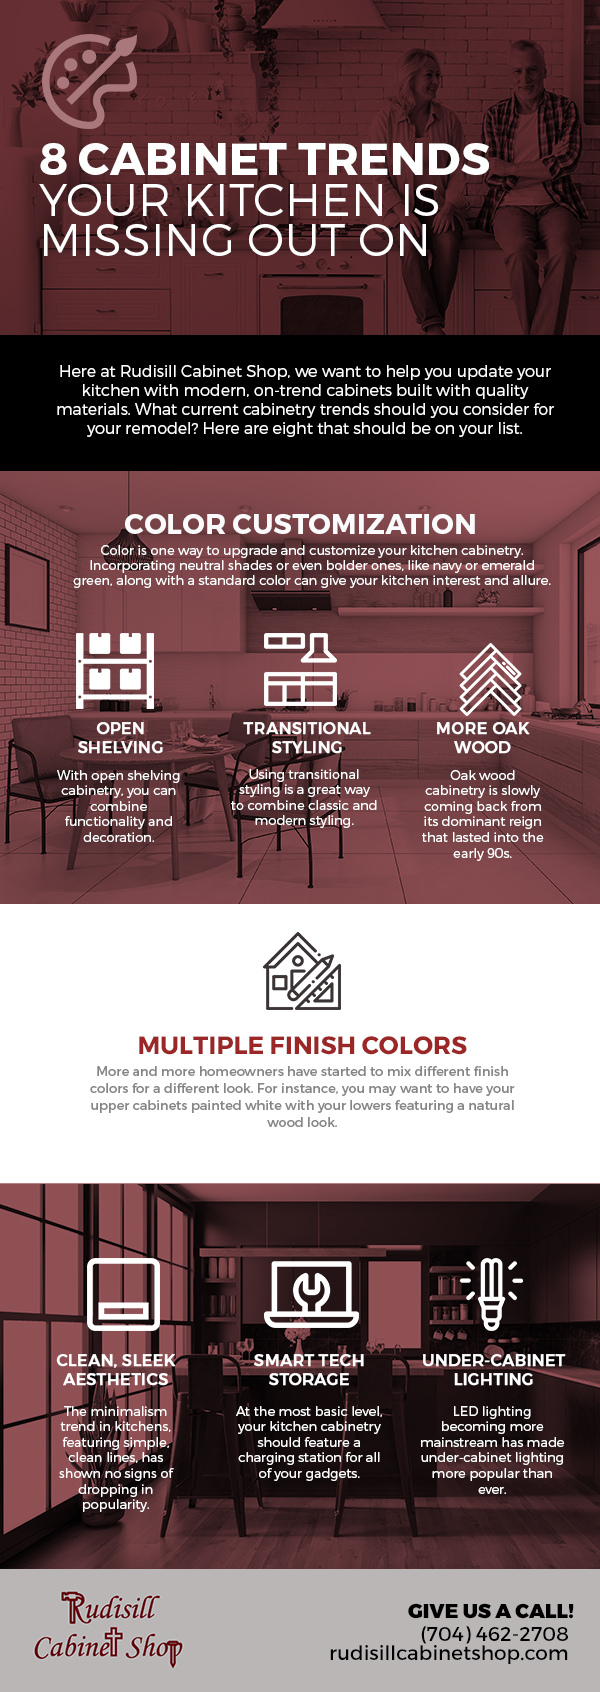 8 Cabinet Trends Your Kitchen is Missing Out On [infographic]